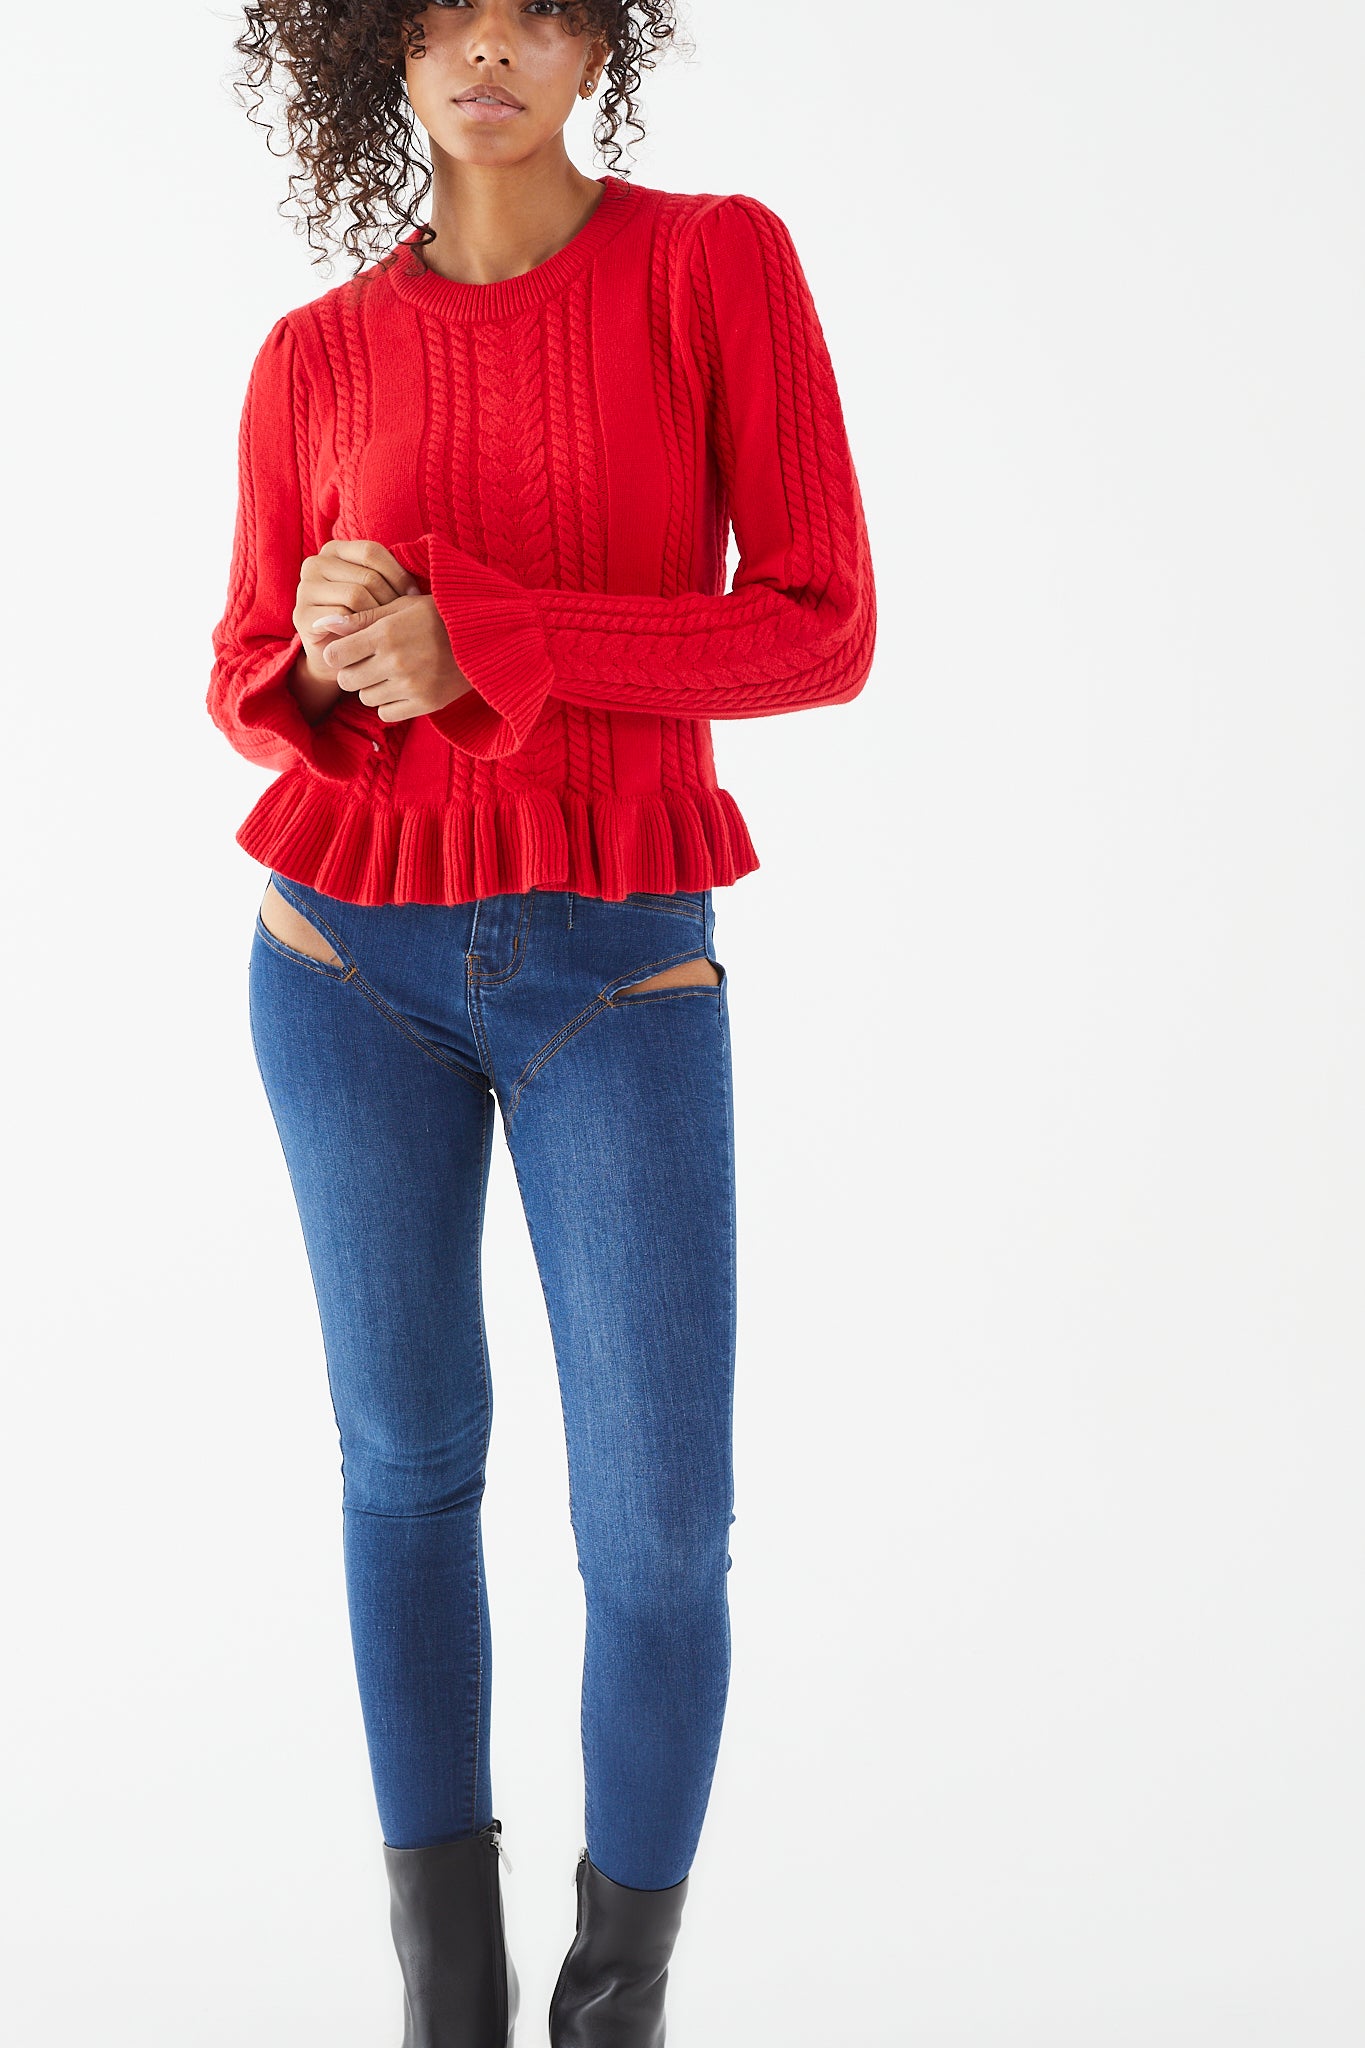 Bright Red Pepper Knit Ruffled Sweater womens clothing store